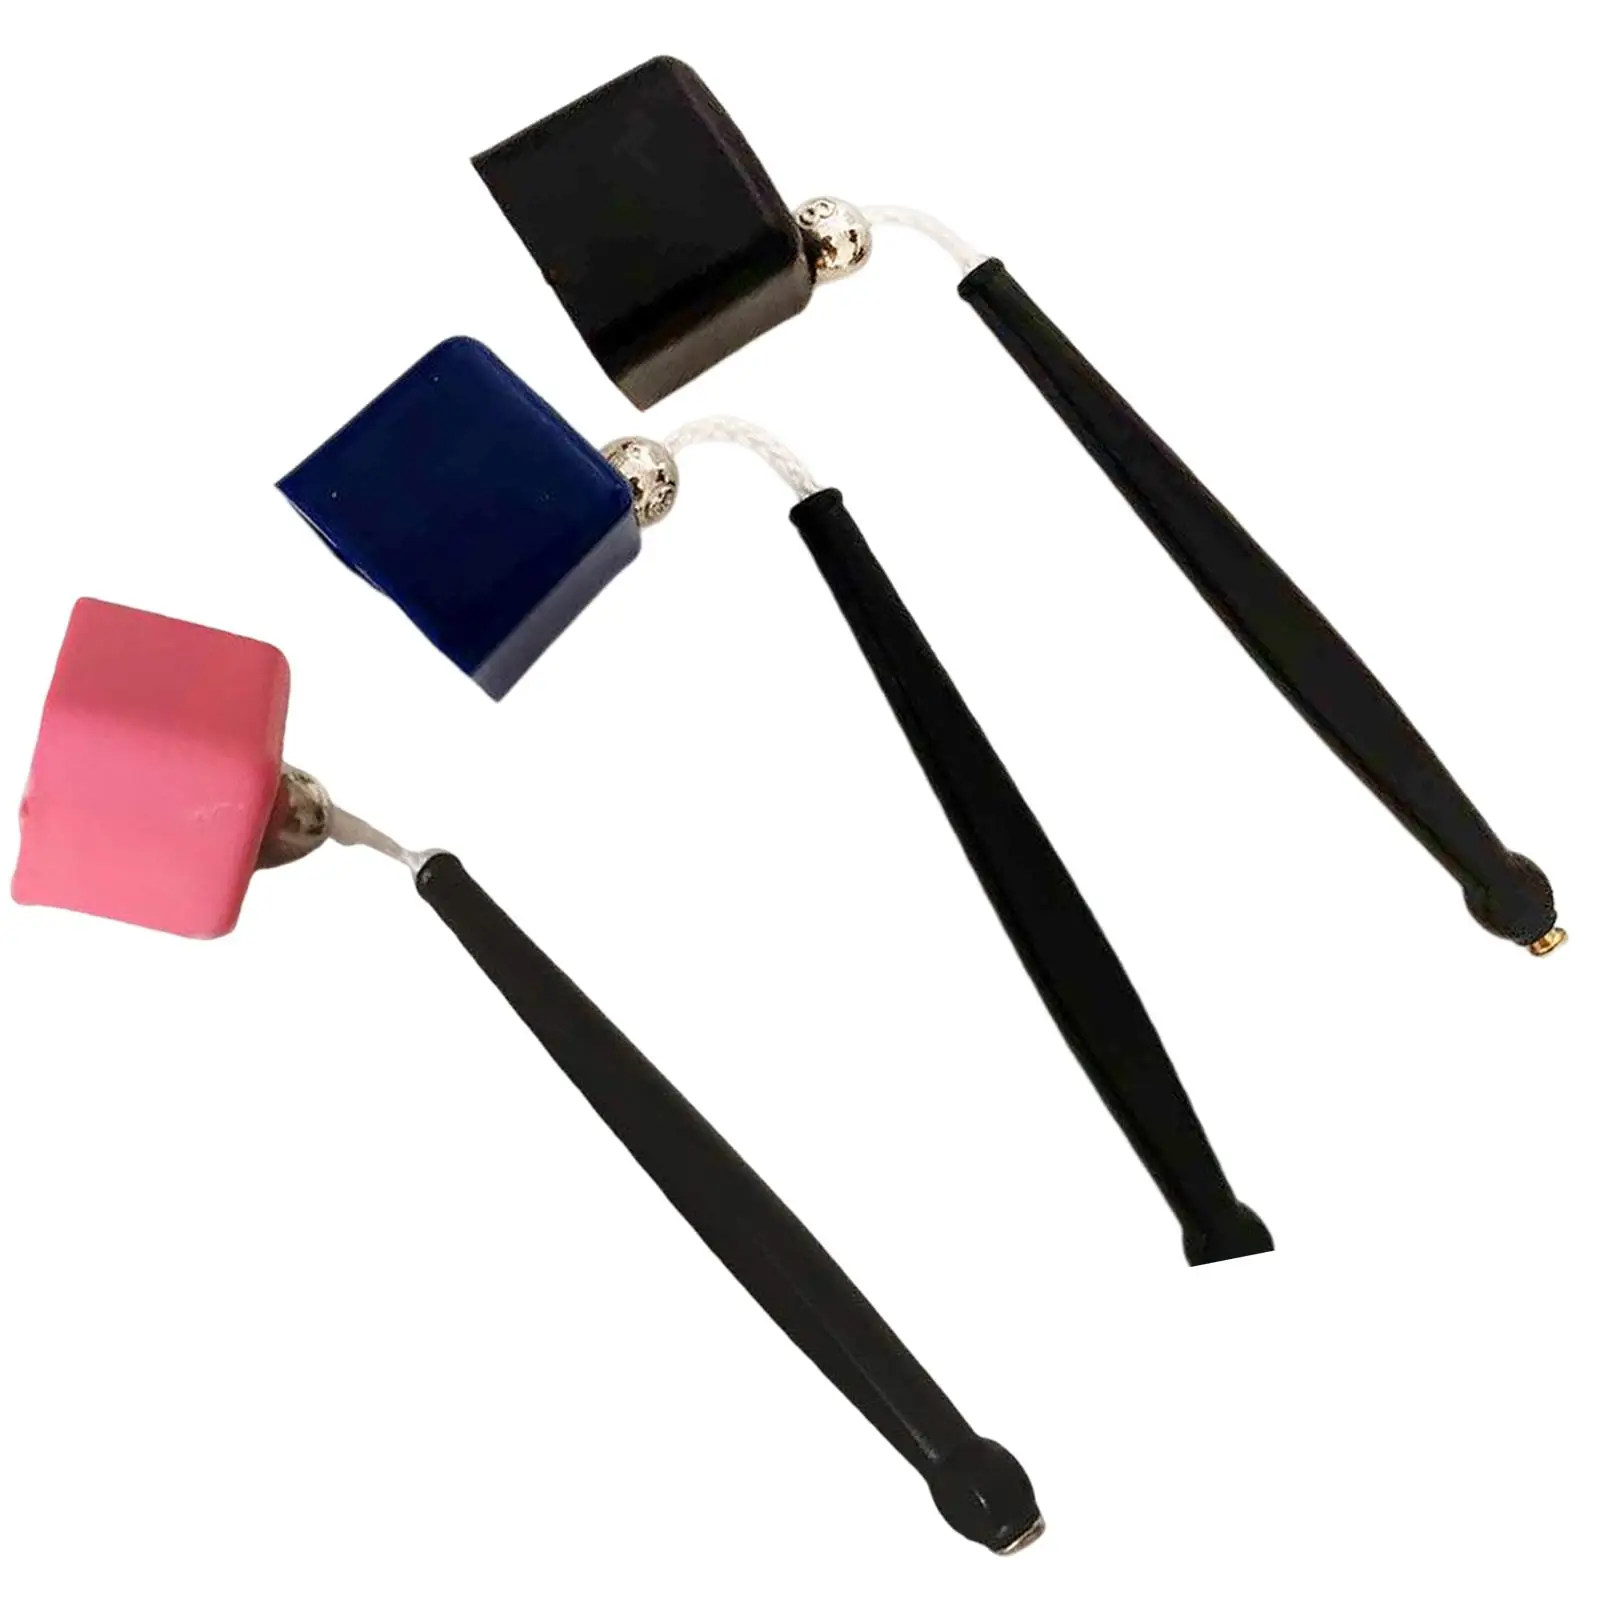 Professional Billiards Pocket Chalkers Holder Easy to Use Cue Chalk Portable